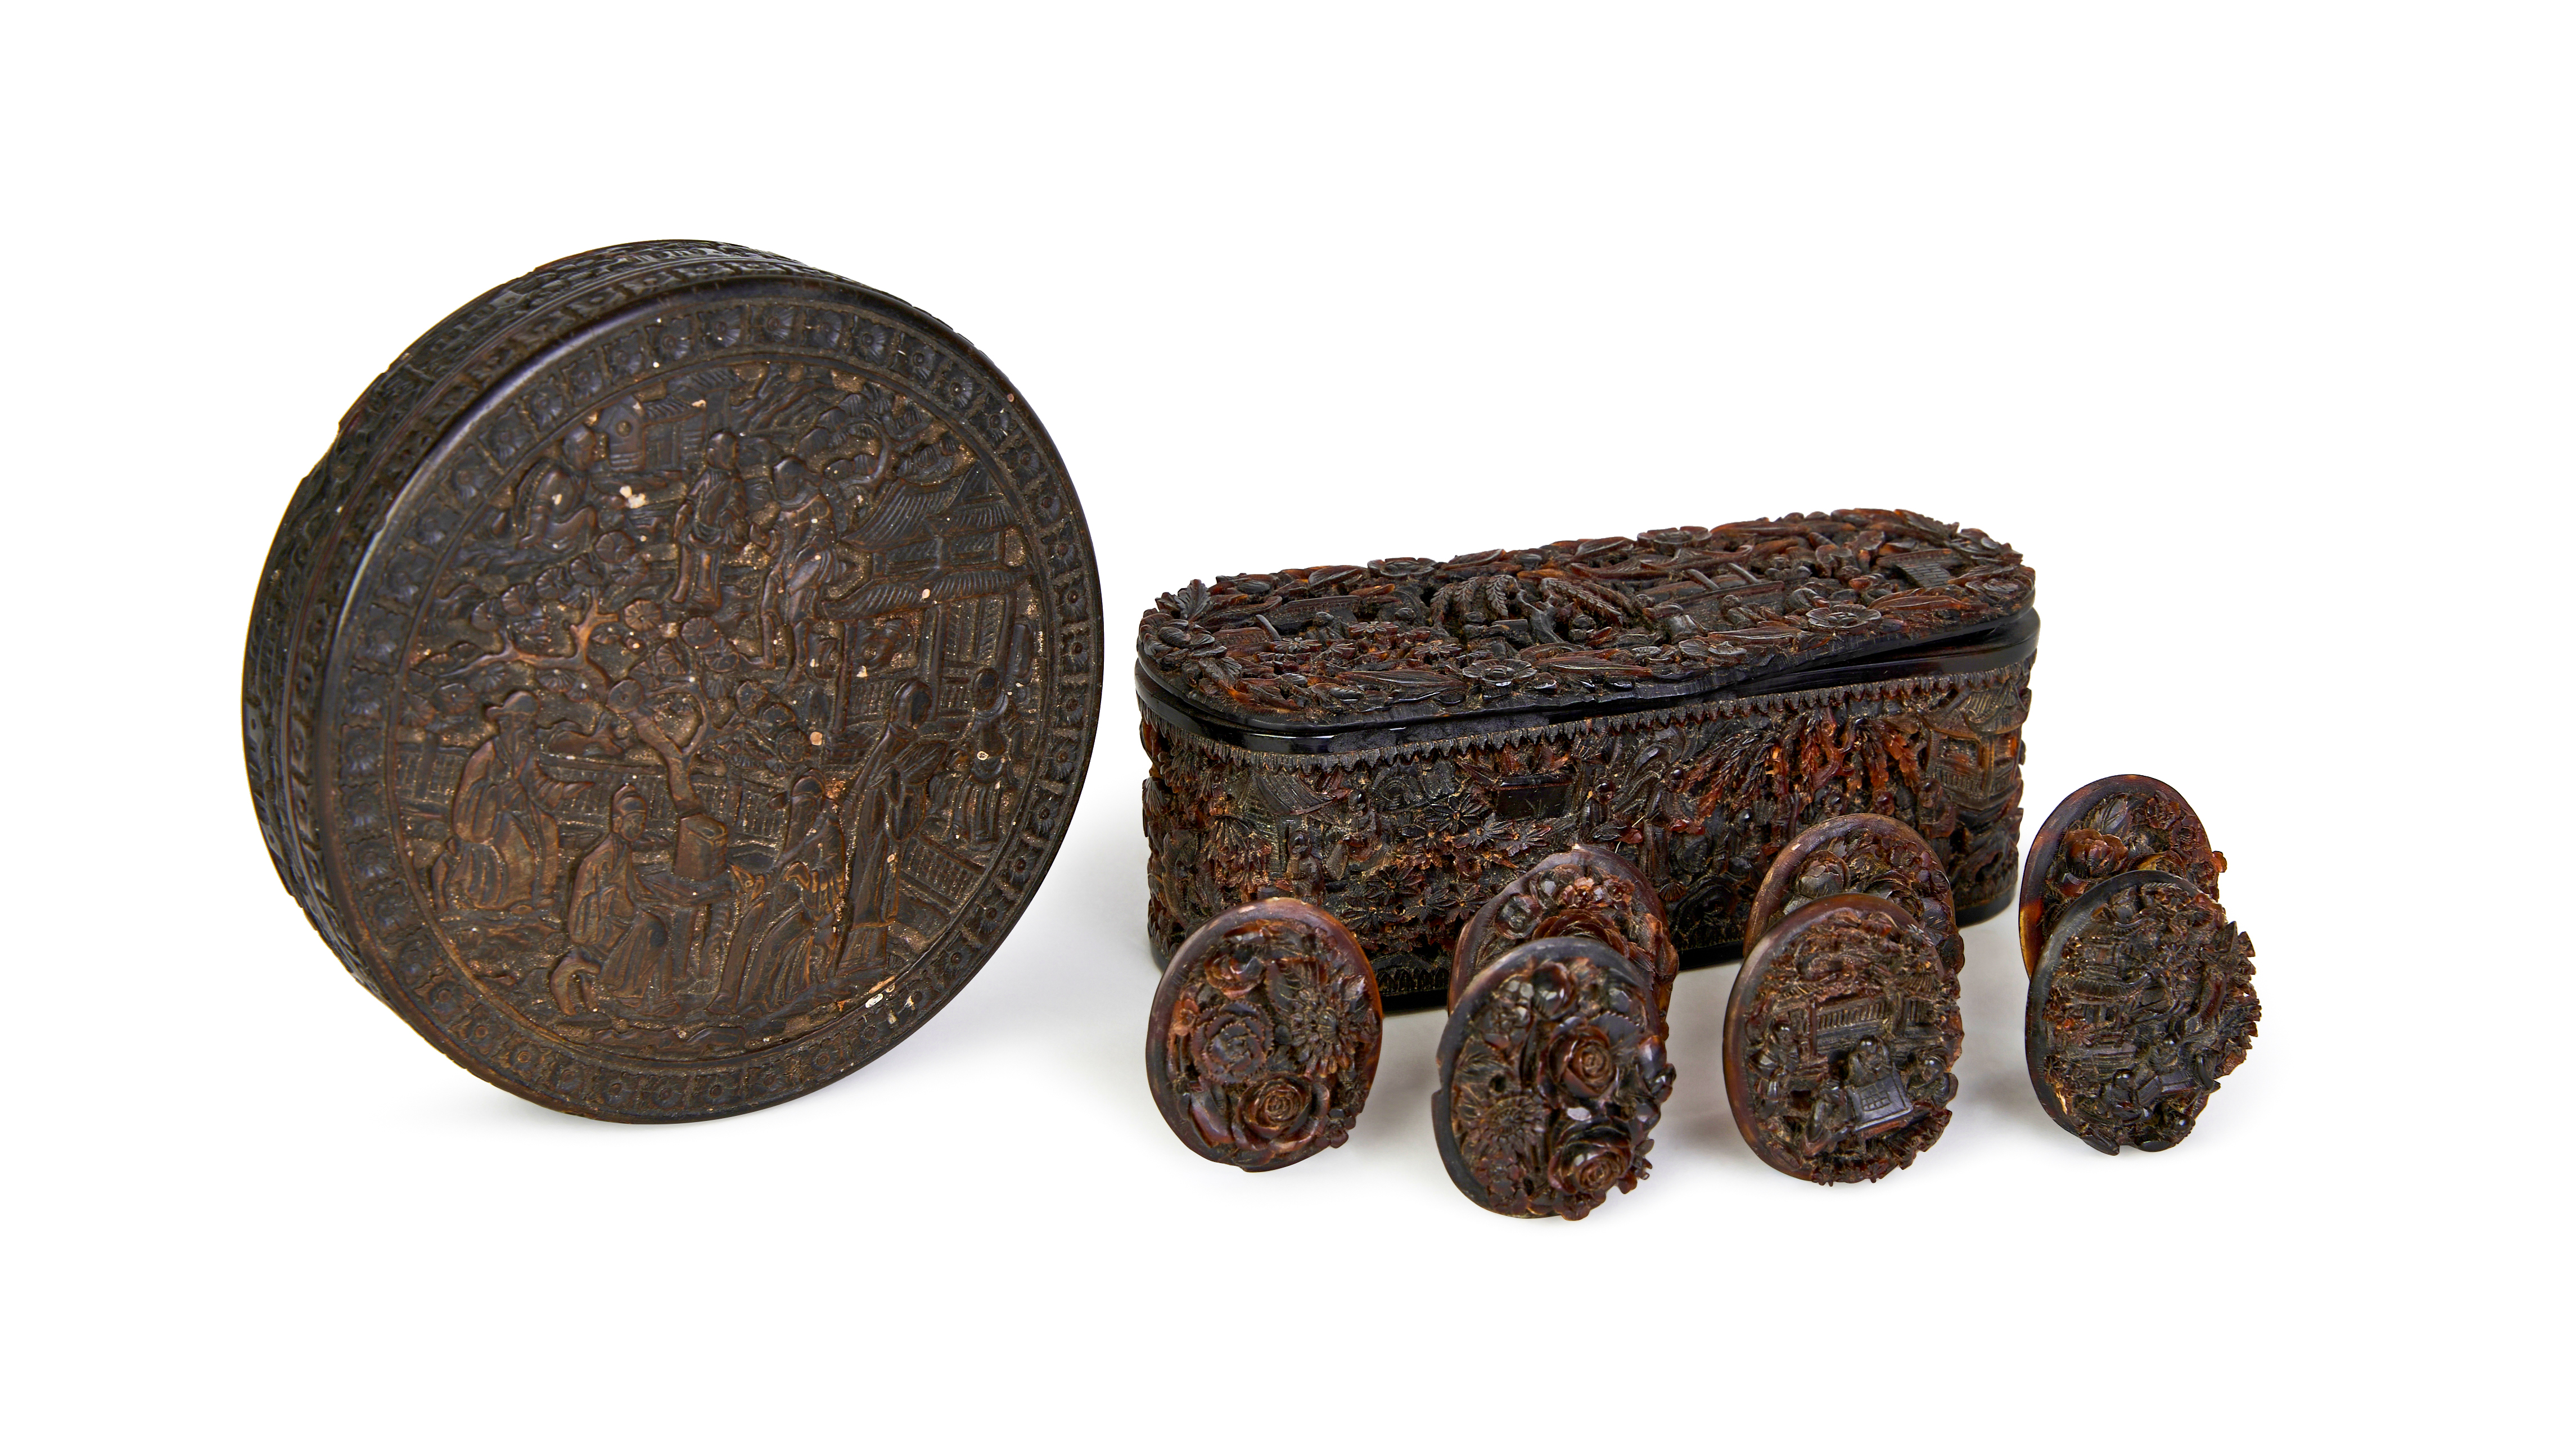 ASSORTMENT OF CARVED CHINESE TORTOISE SHELL BOXES, 18TH CENTURY